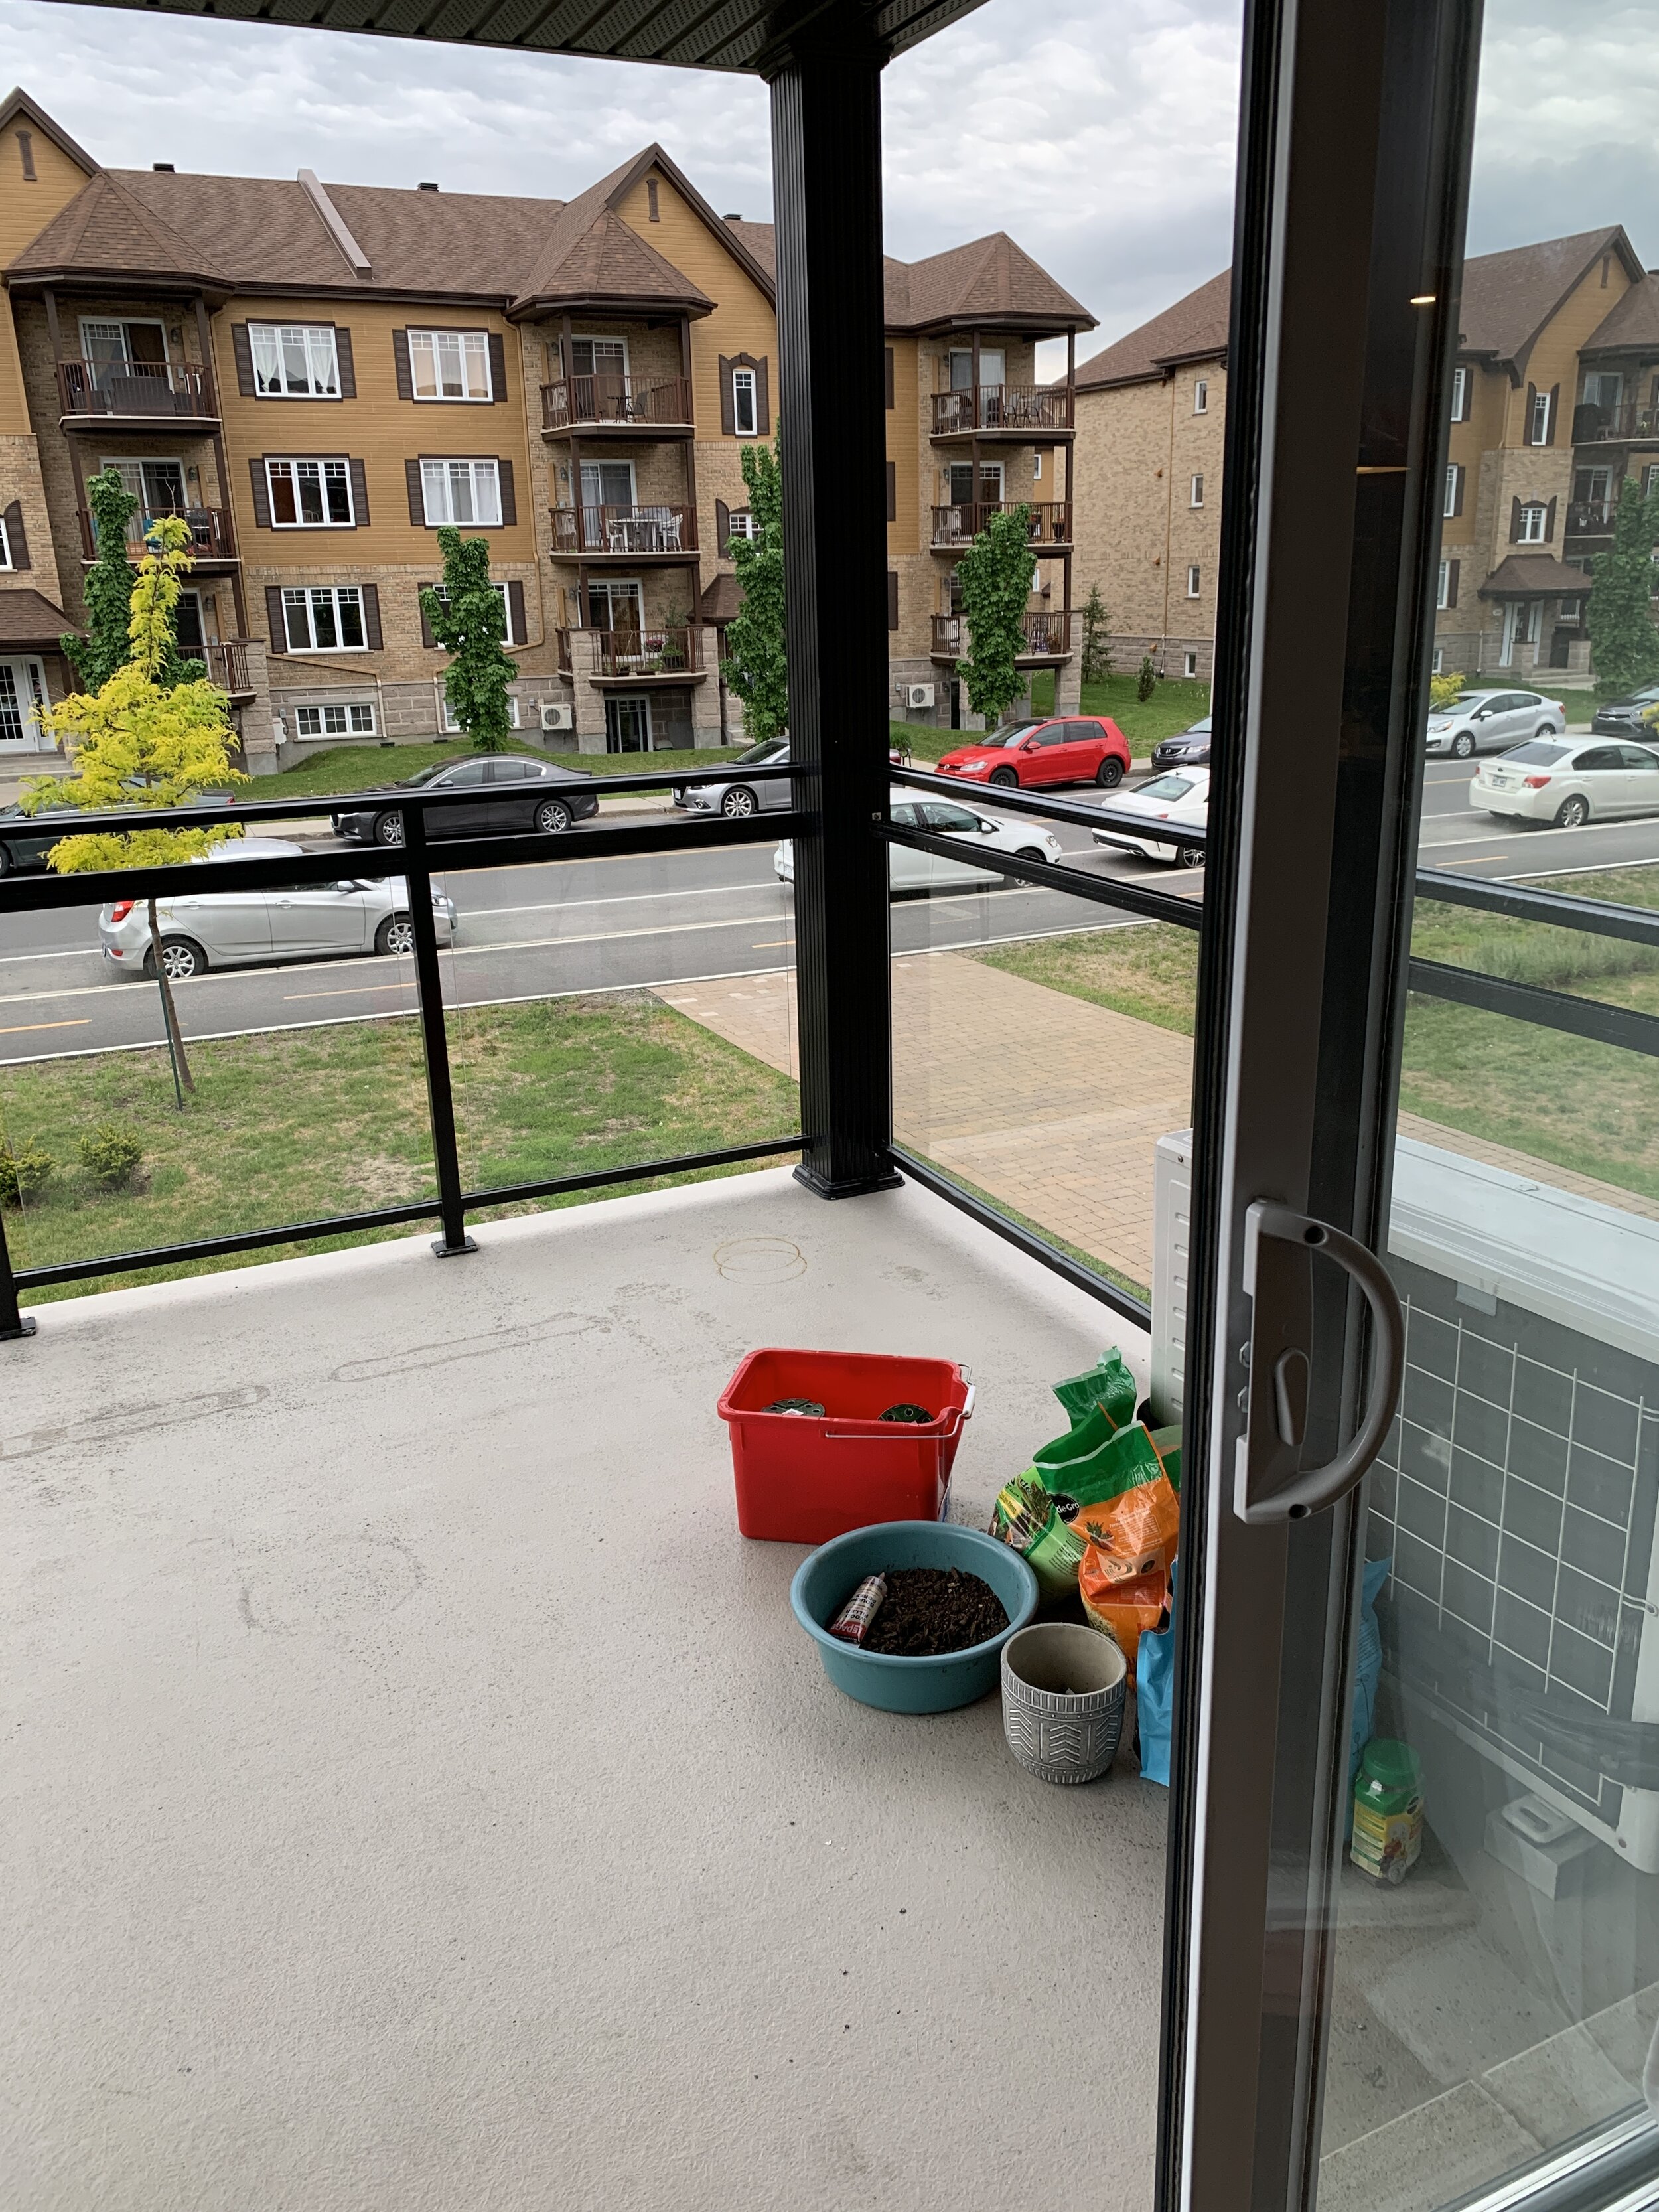  Get a condo balcony makeover idea with before and after images to create a balcony area you'll love to use to relax and entertain. #balcony #ikeamakeover | condo balcony ideas ikea | condo balcony ideas small | condo balcony ideas decor | condo balc